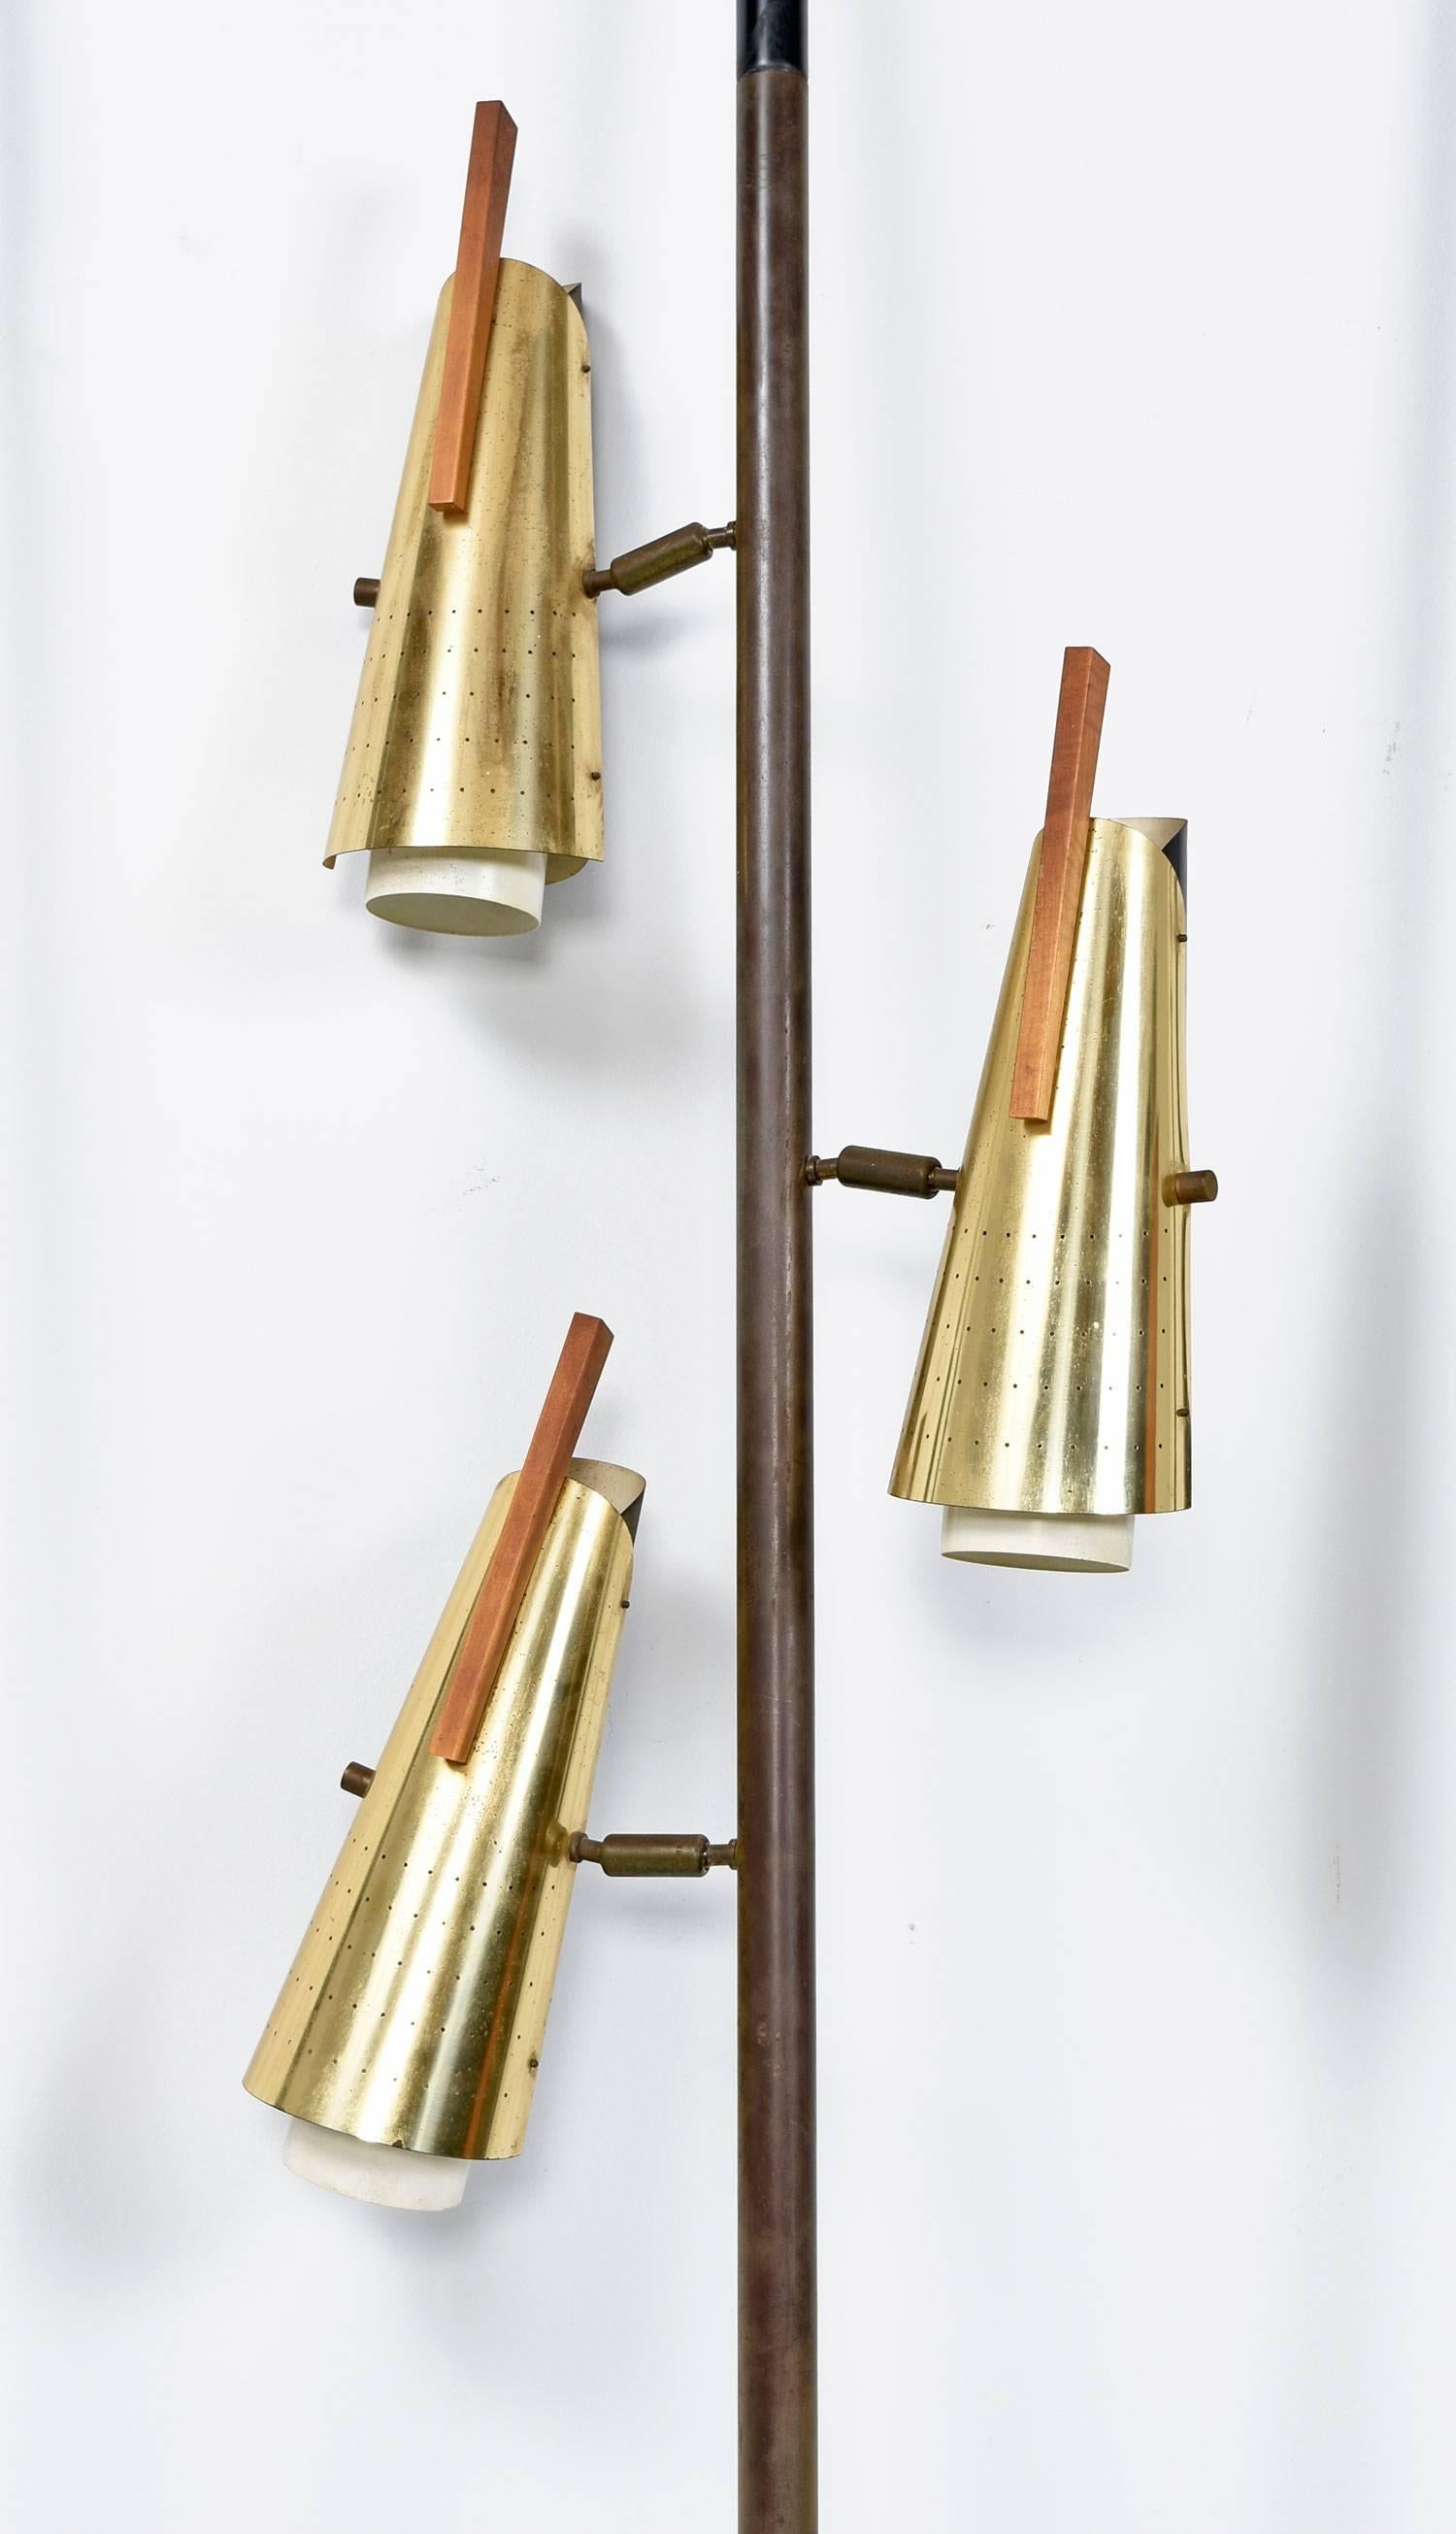 Set of five Mid-Century Modern pole tension pole lamps by Stiffel, 1950s. This atomic style room divider features five individual tension poles, one with a set of three adjustable lamps. Each of these poles can be placed as you'd like to create the